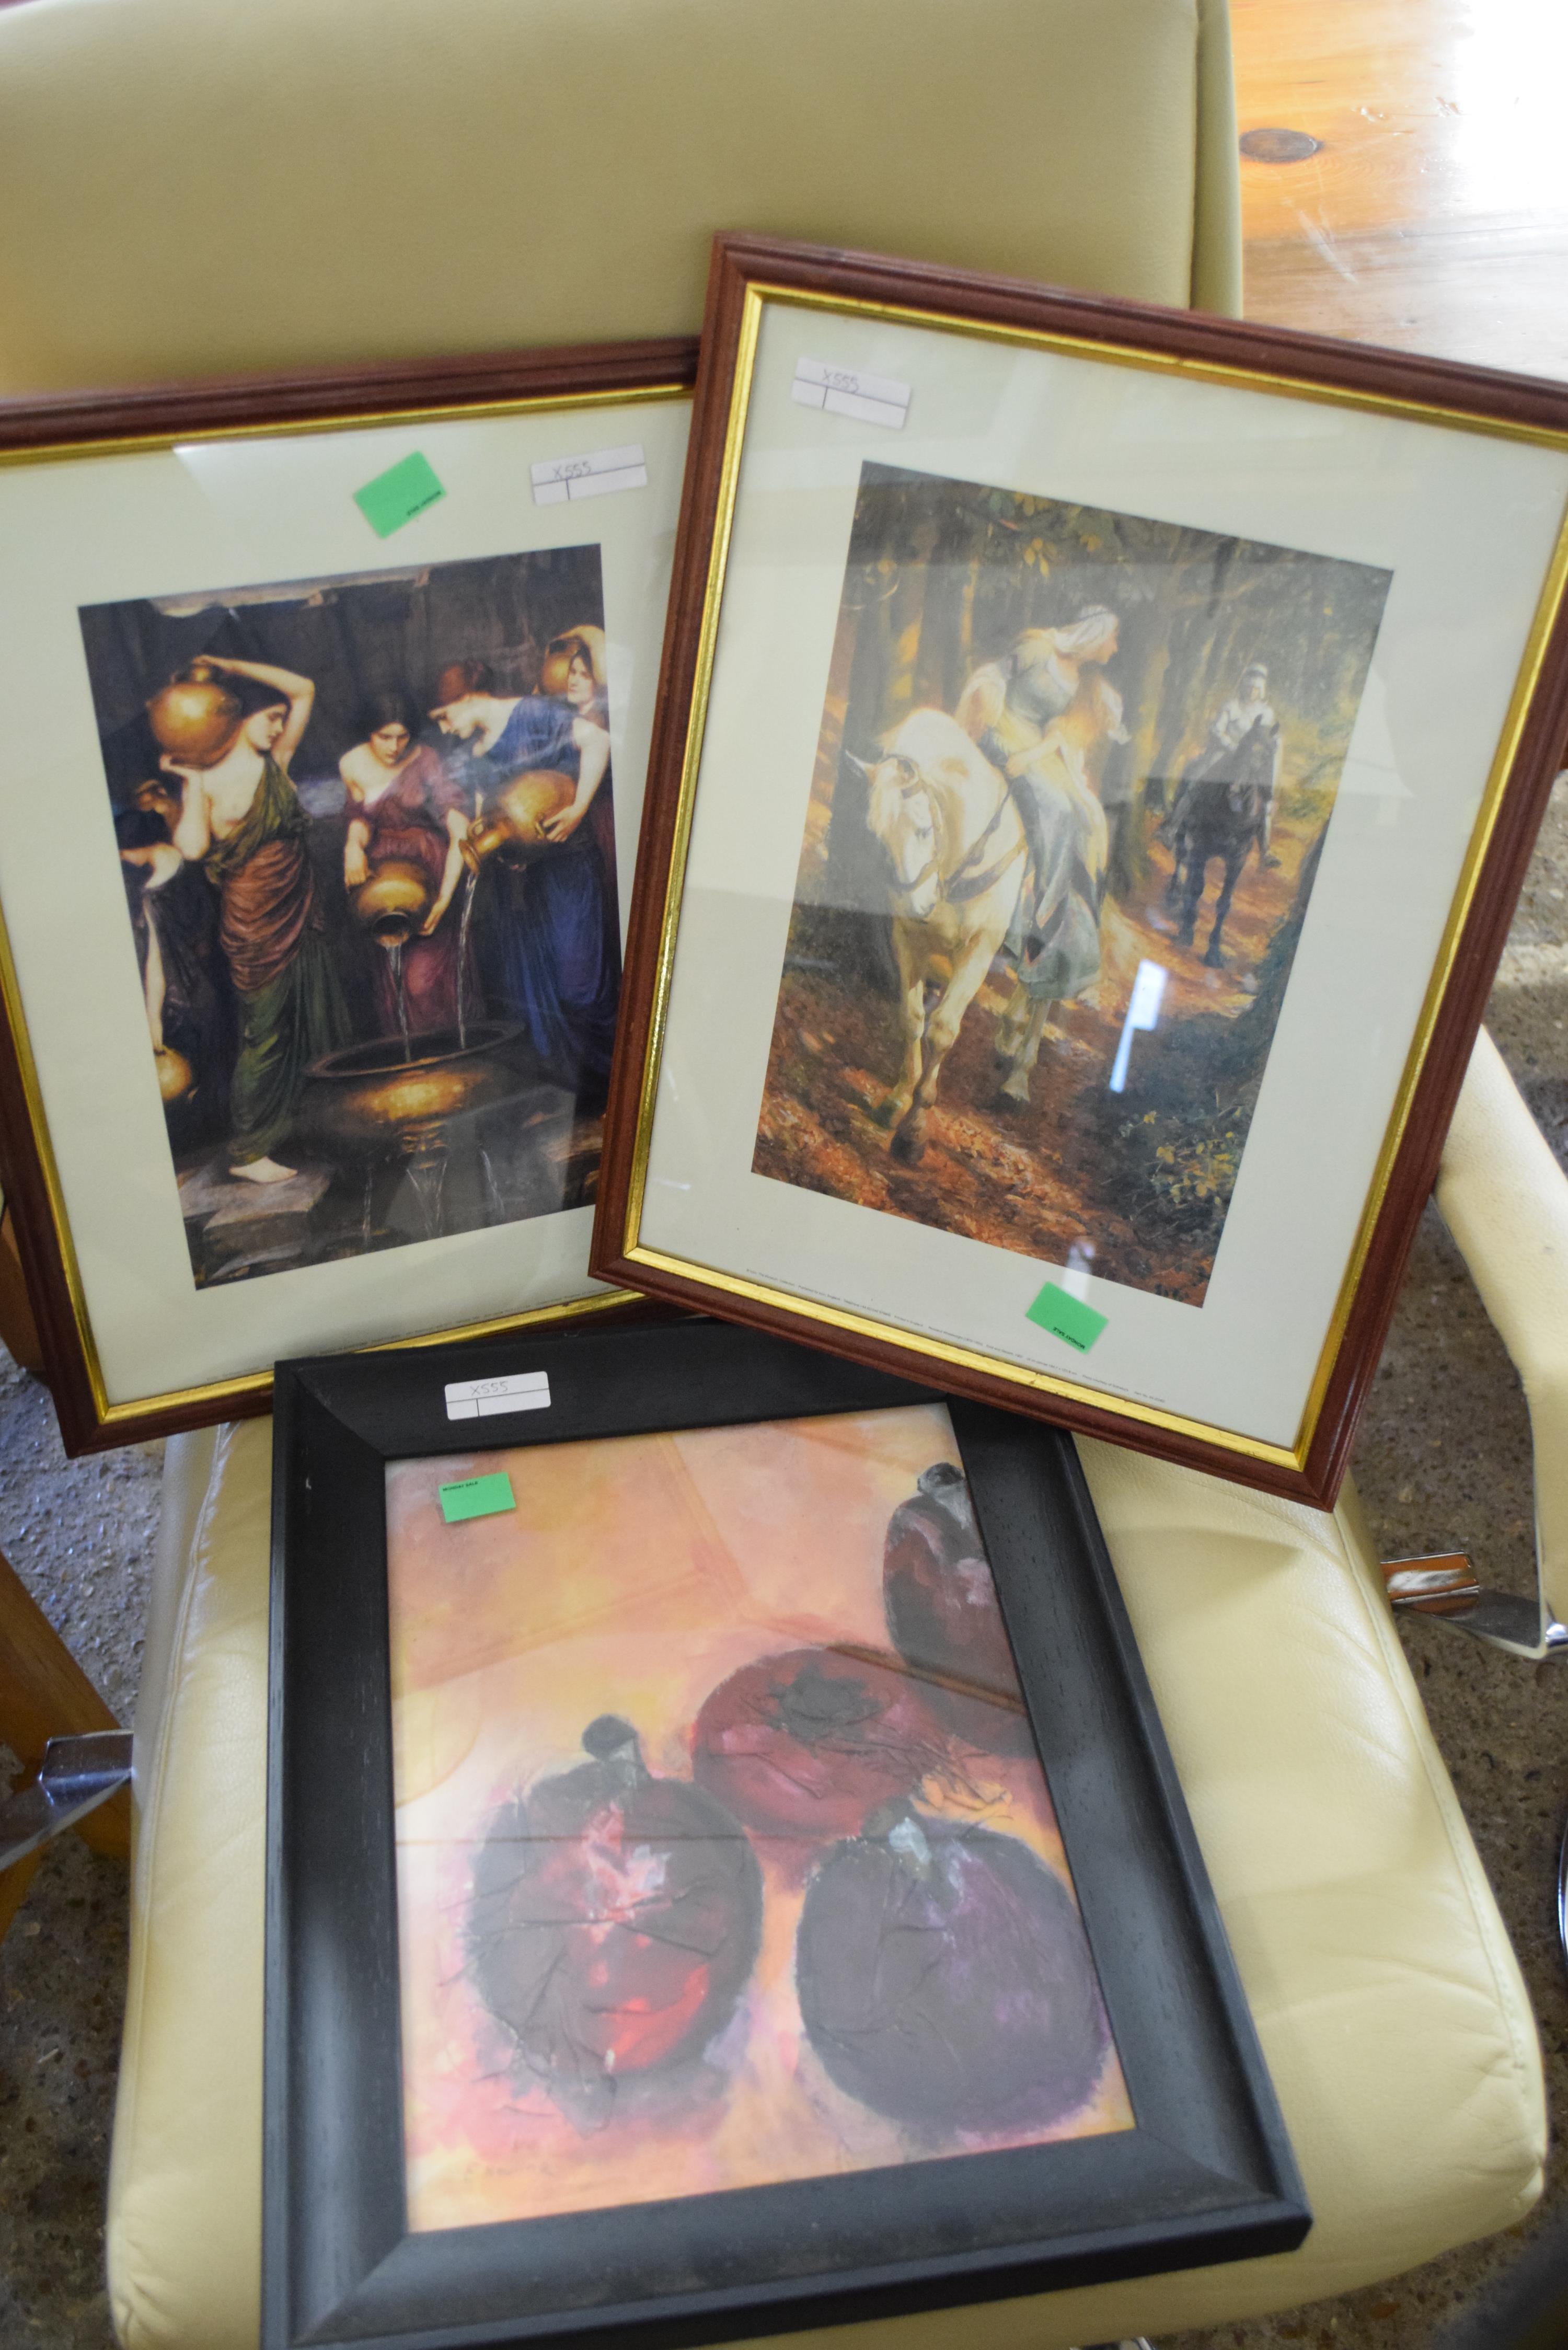 TWO FRAMED PRINTS TOGETHER WITH A MXIED MEDIA ABSTRACT, STILL LIFE OF FRUIT BEARING SIGNATURE E